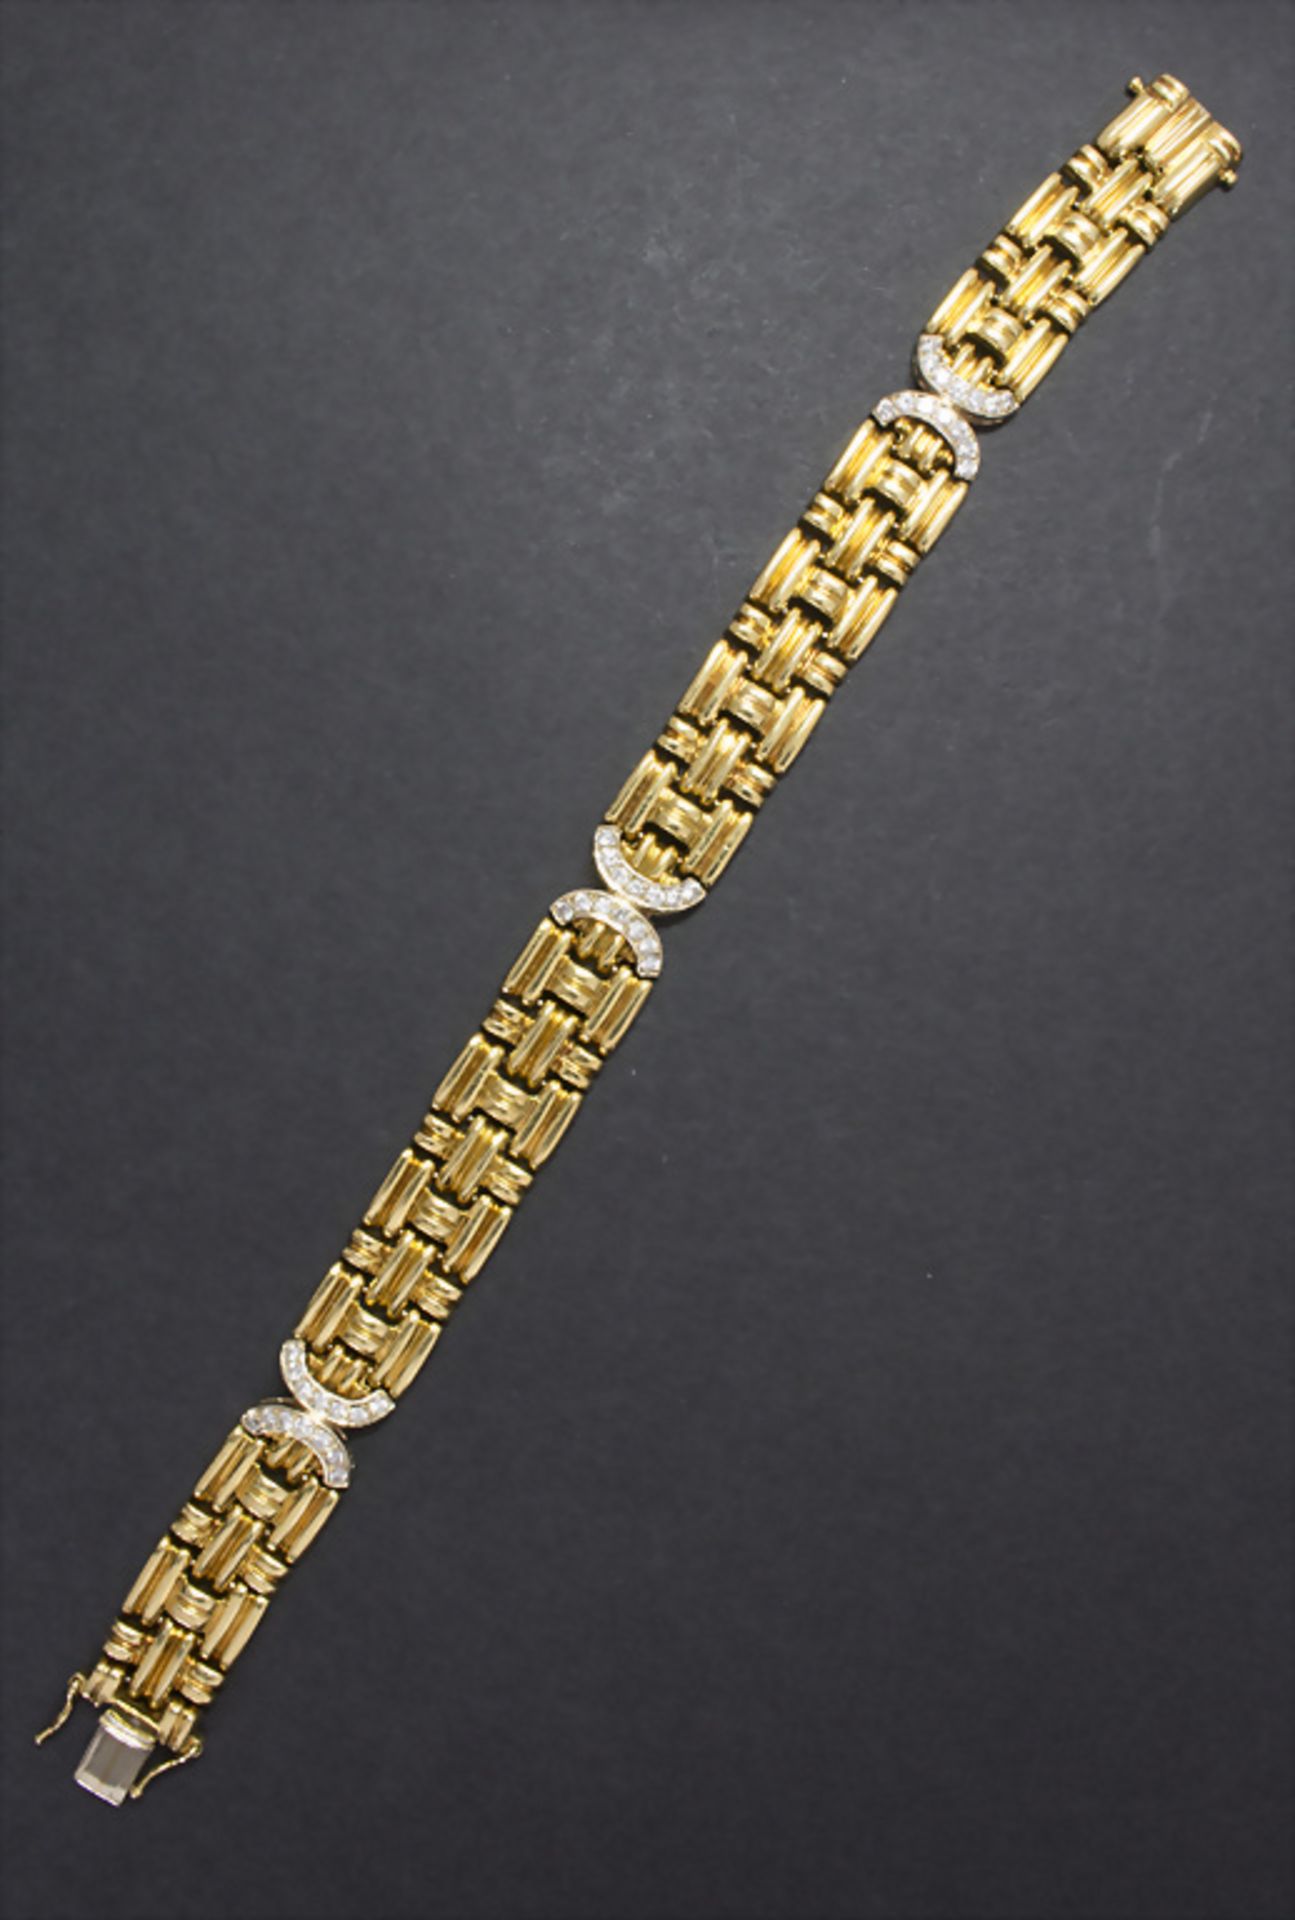 Armband in Gold mit Diamant / A bracelet in gold with diamond - Image 4 of 4